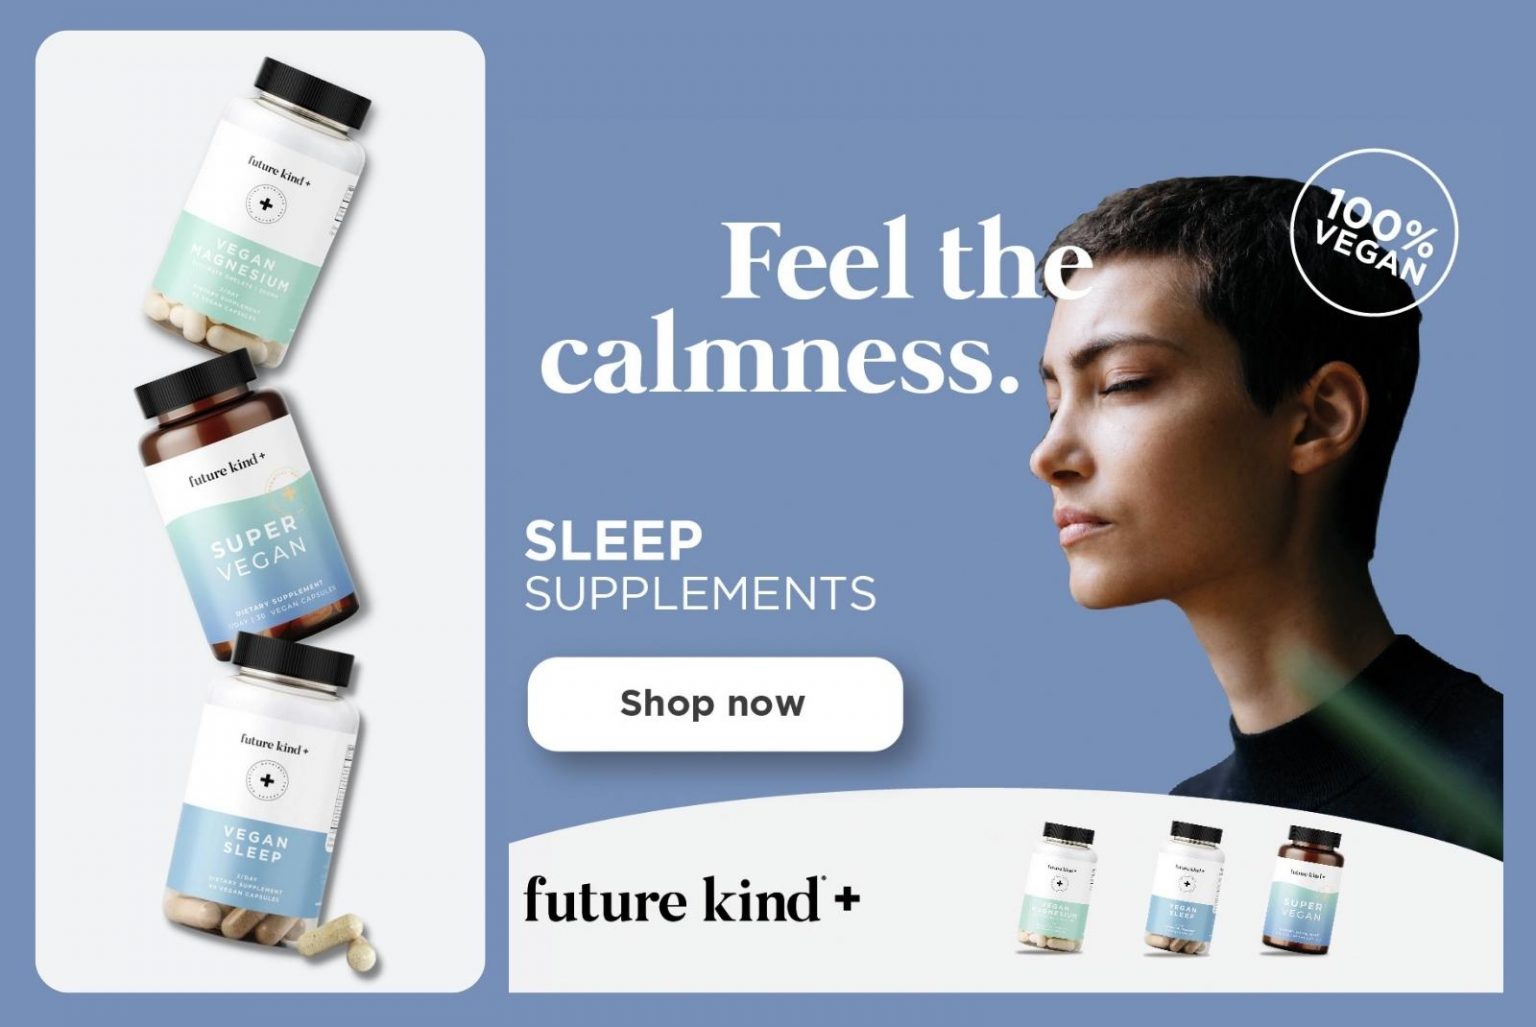 Future kind+ vegan sleep supplements to support your nightly rest and great days ahead.